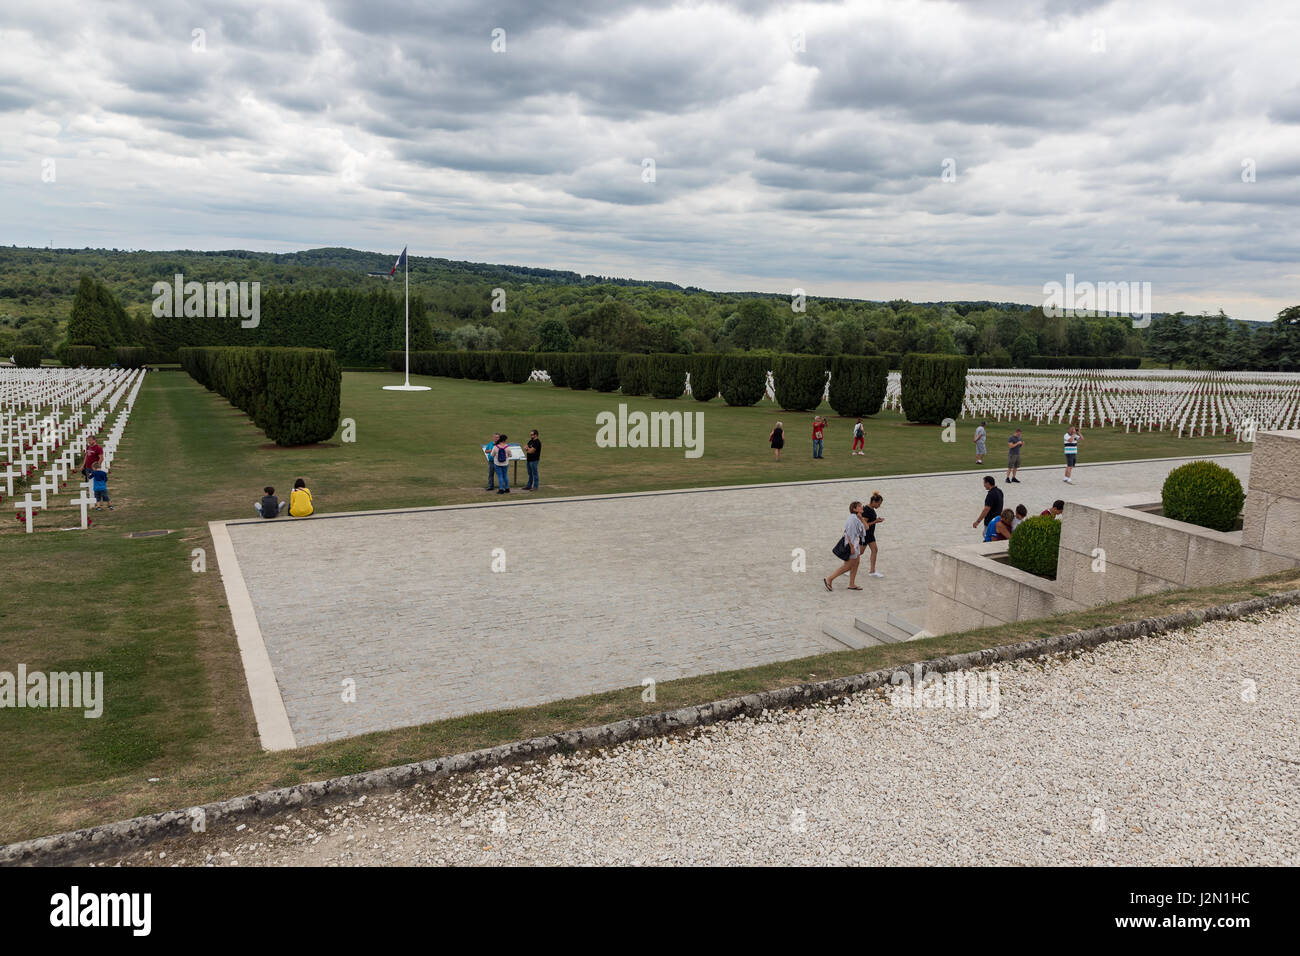 VERDUN, FRANCE - AUGUST 19, 2016: Visitors at Cemetery for First World War One soldiers who died at Battle of Verdun Stock Photo